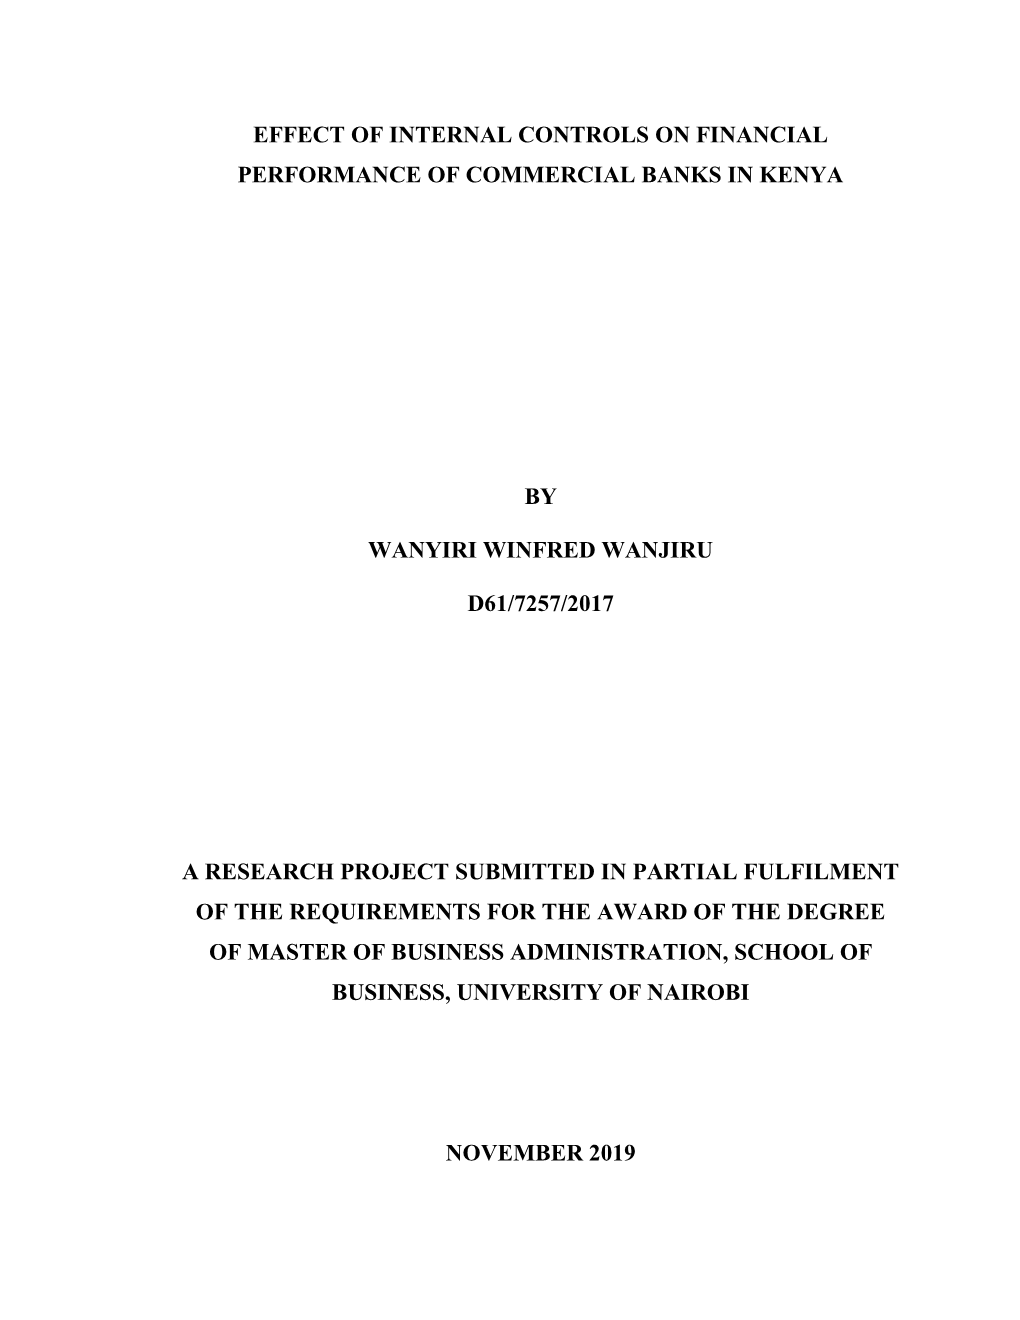 Effect of Internal Controls on Financial Performance of Commercial Banks in Kenya